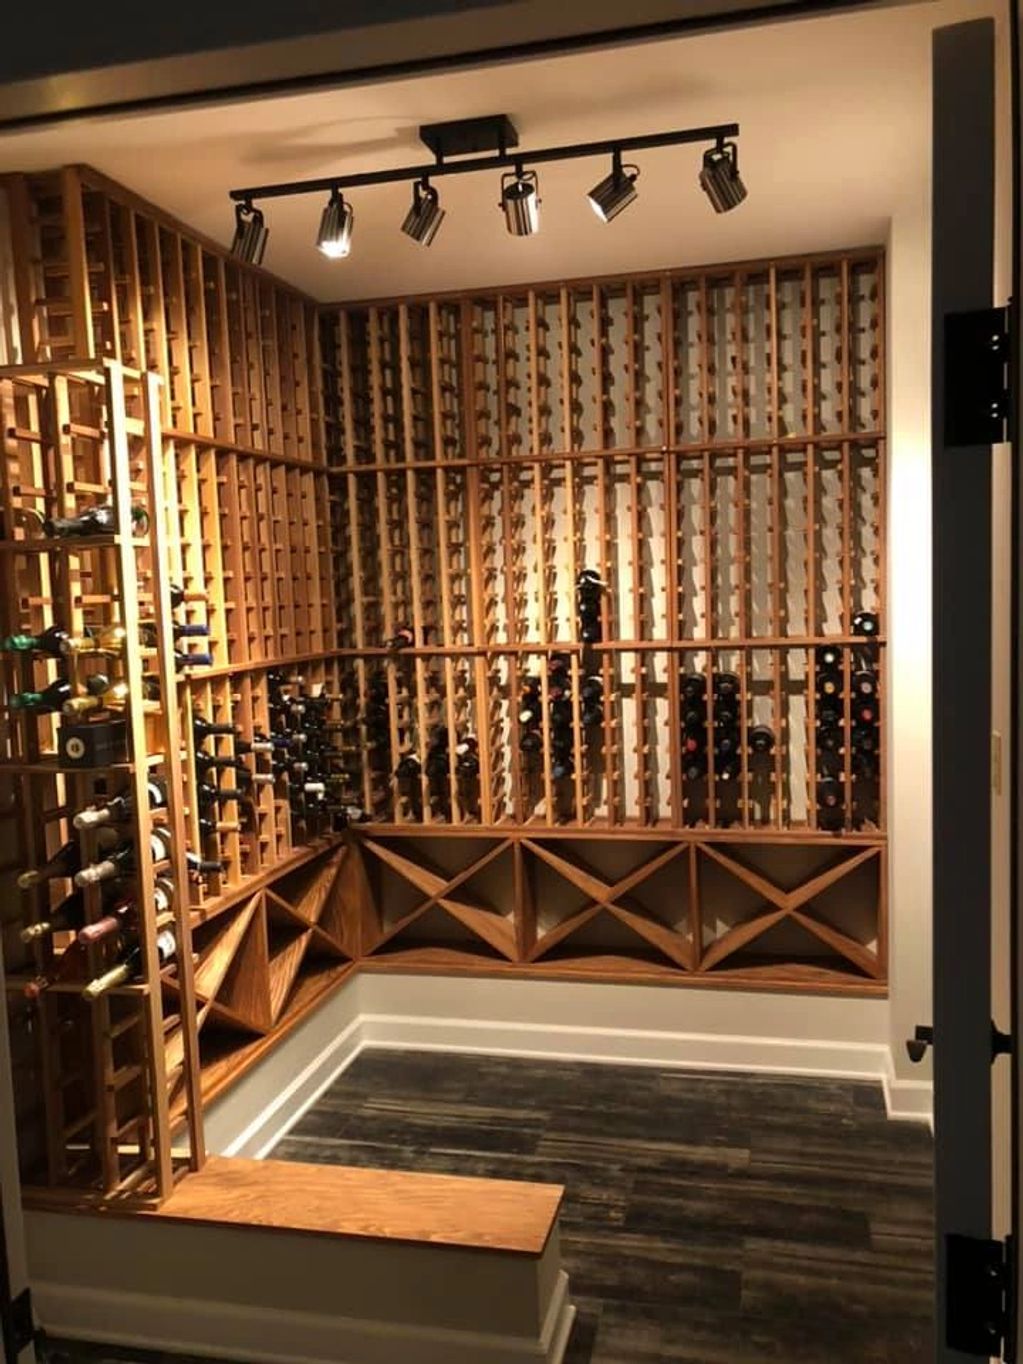 Our customer wanted this small utility room turned into a wine cellar. Not quite a cellar, but this 